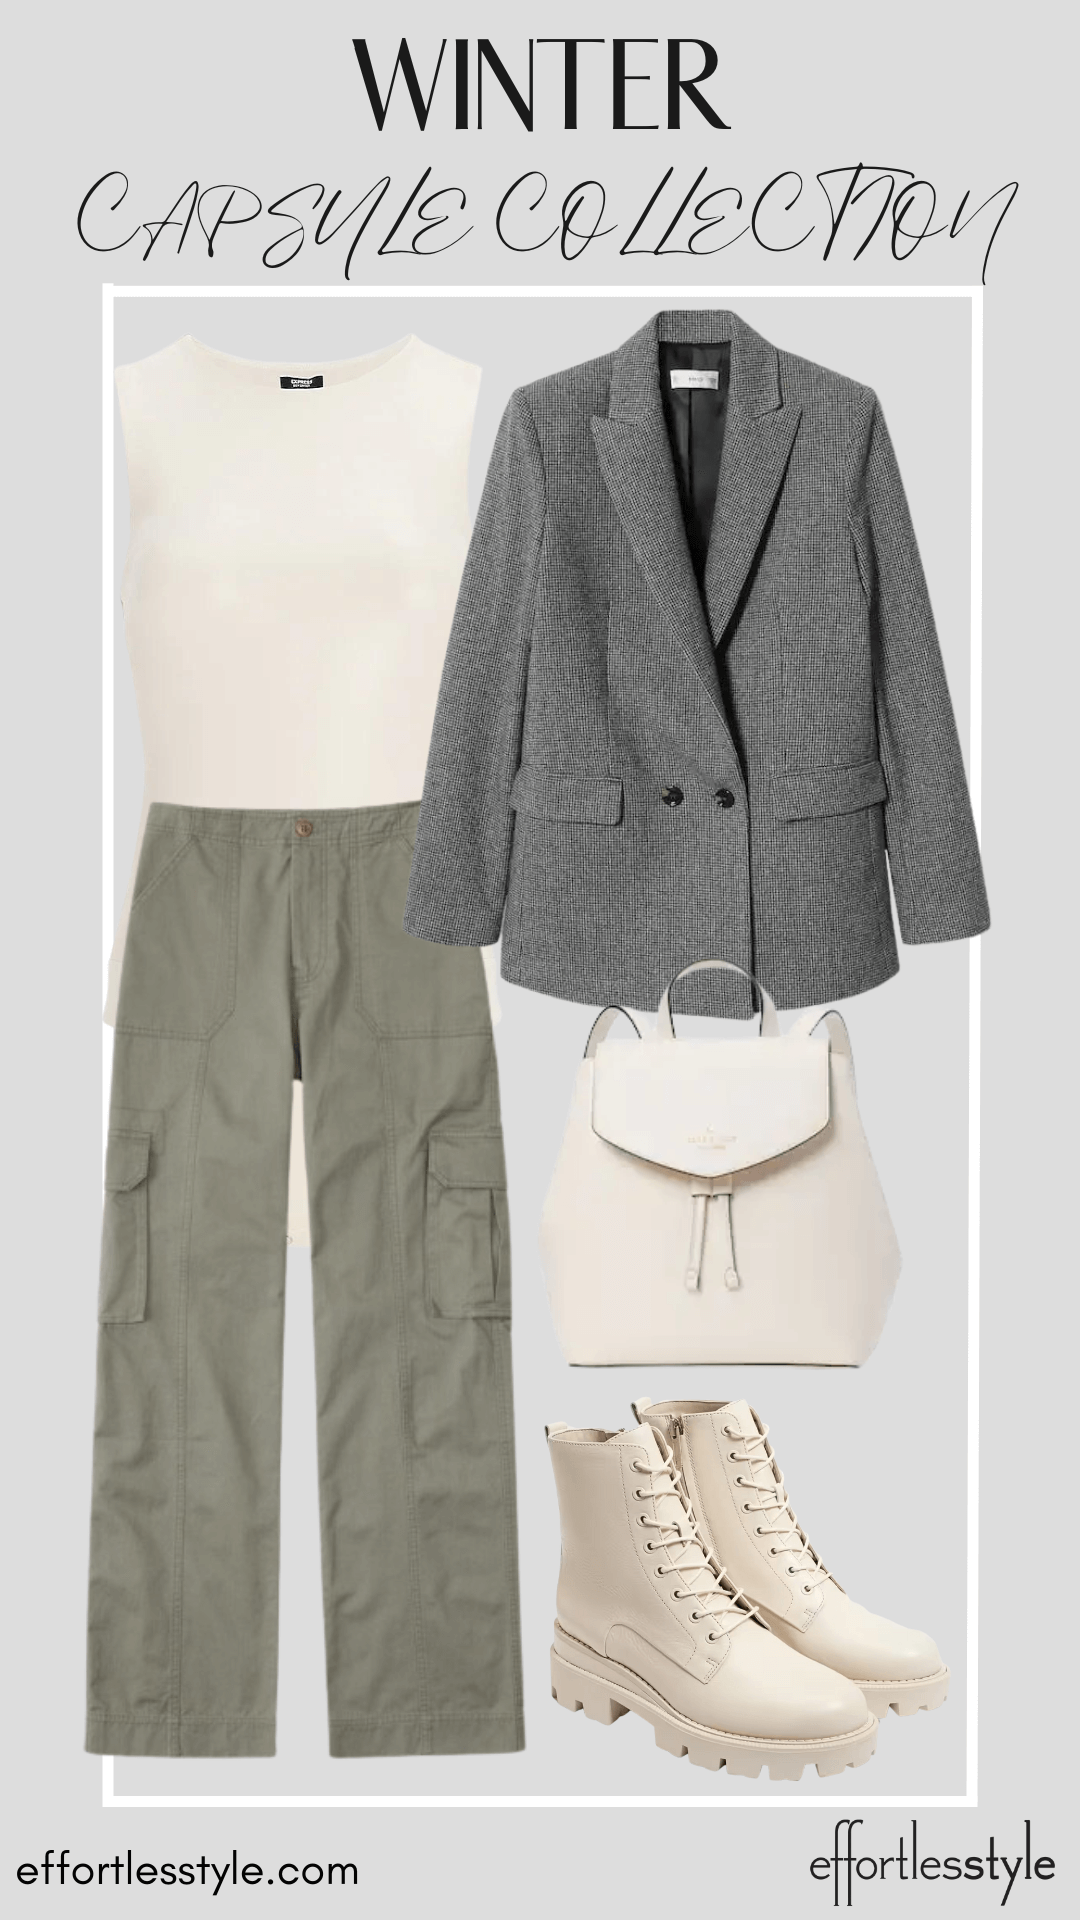 Houndstooth Blazer & Faux Leather Bodysuit & Cargo Pants styling a blazer with cargo pants styling a blazer with casual pants Nashville area stylists share fun styled looks must have pieces for cold weather